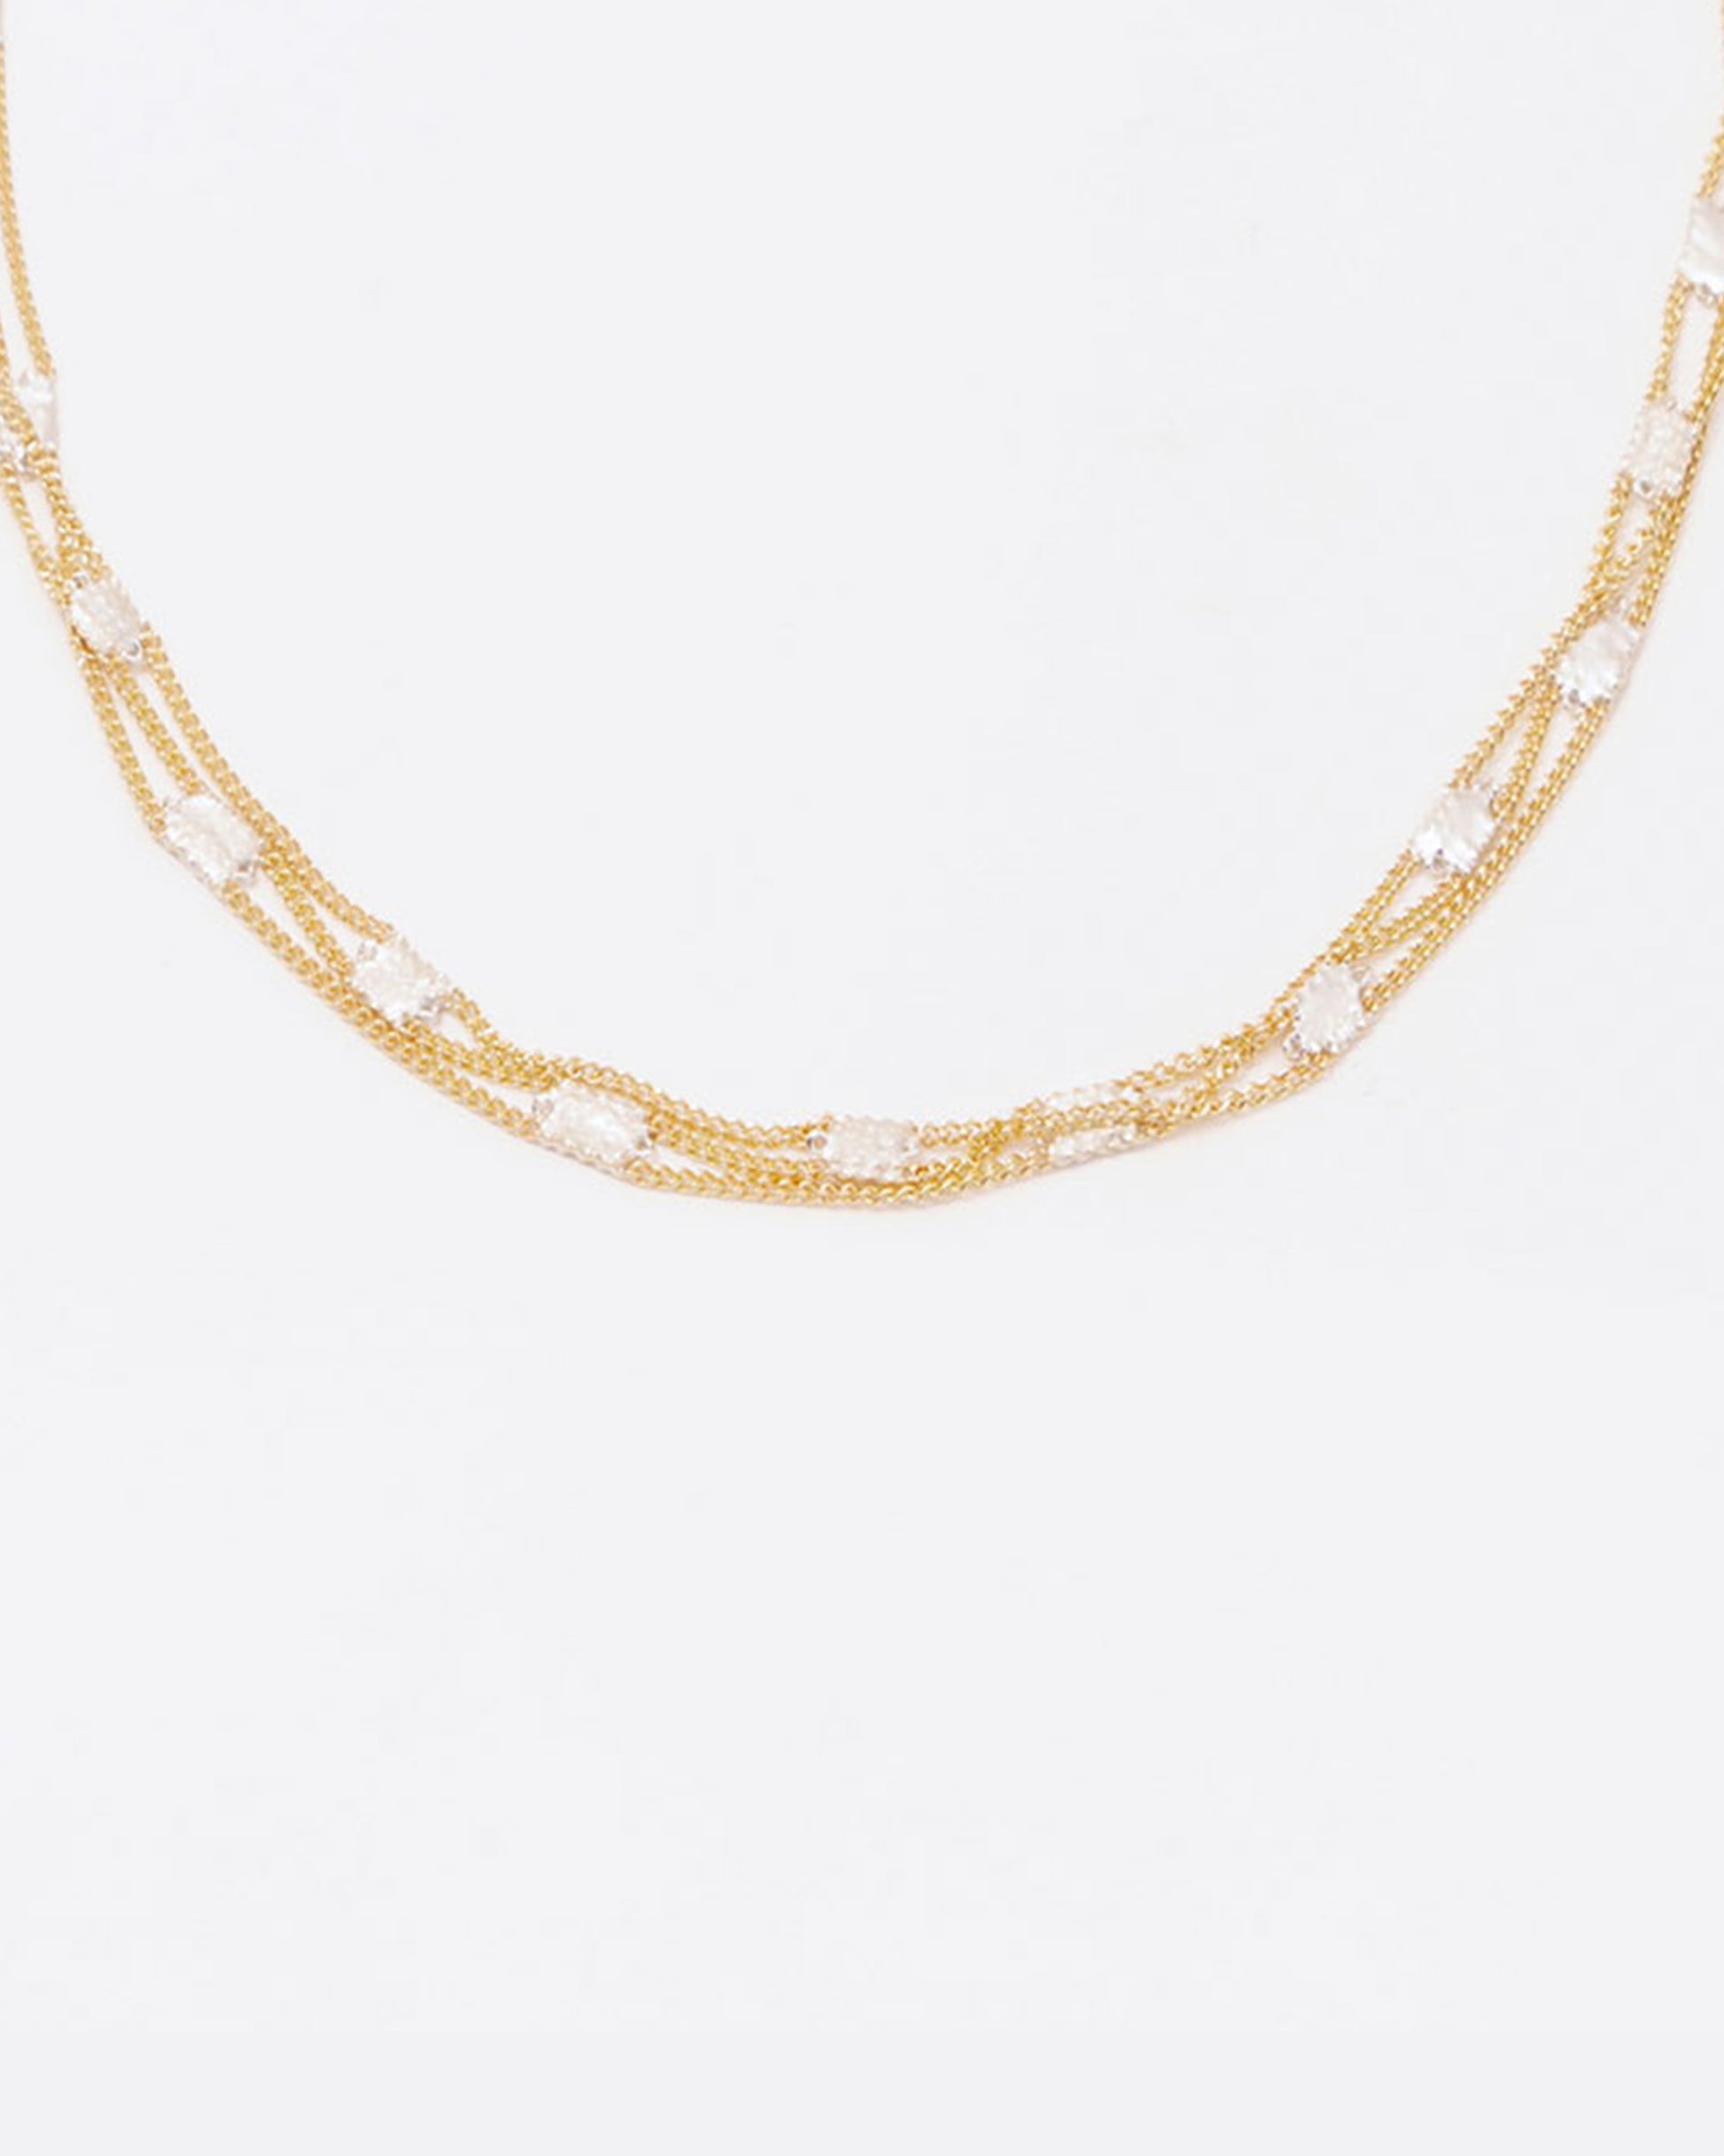 A necklace composed of three solid 18k yellow gold chains connected with sterling silver squares